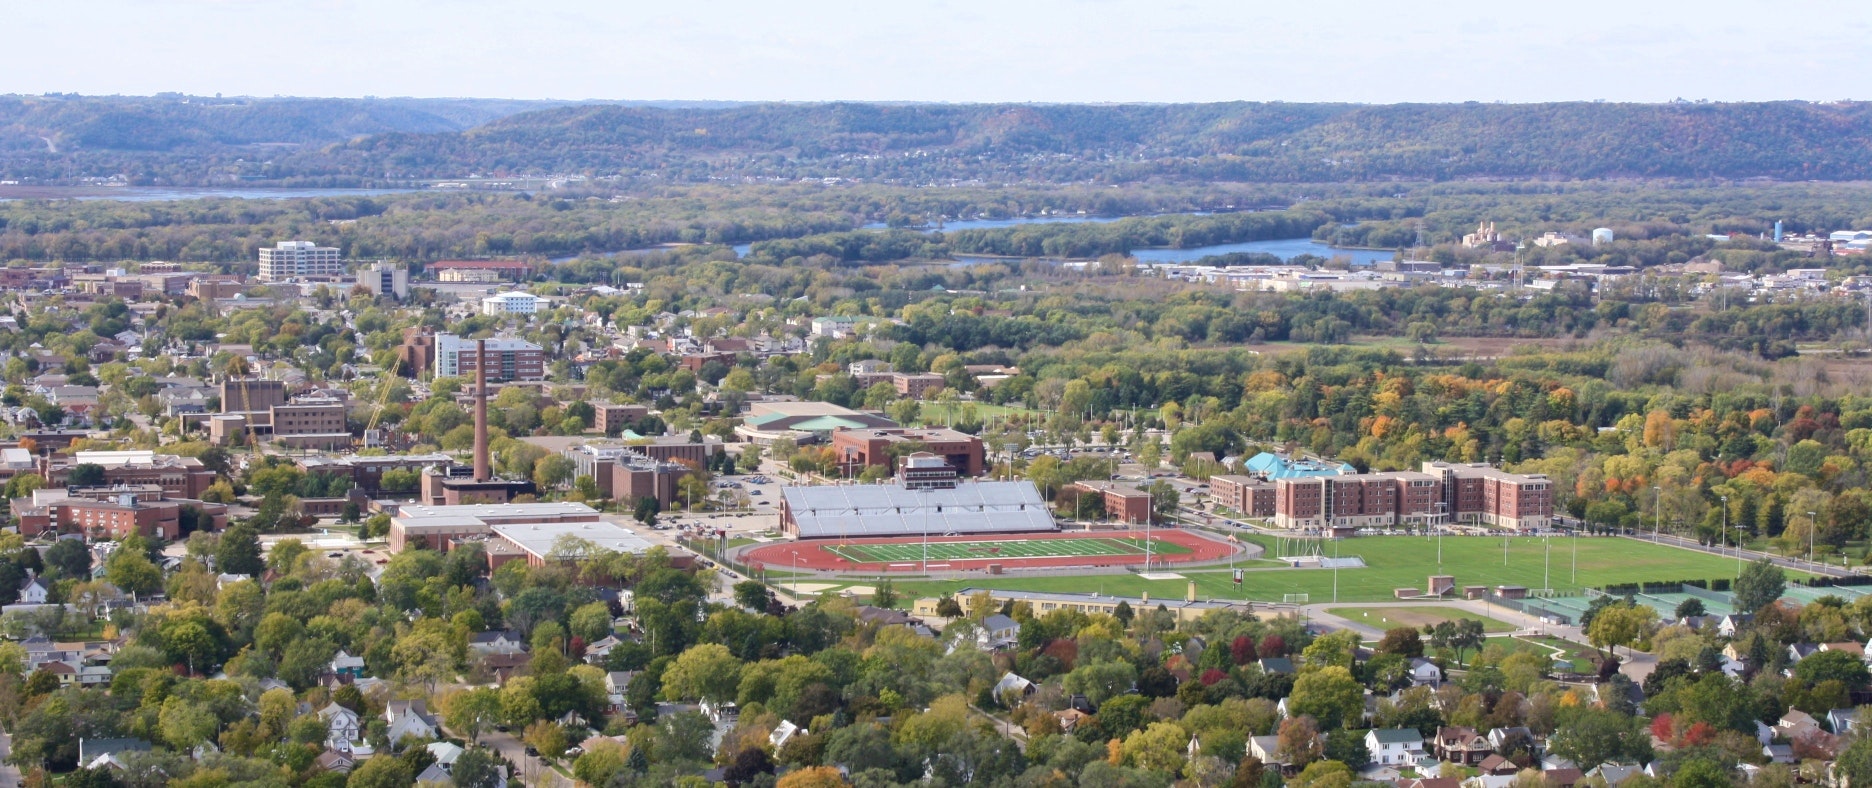 University of Wisconsin La Crosse Net Price, Tuition, Cost to Attend